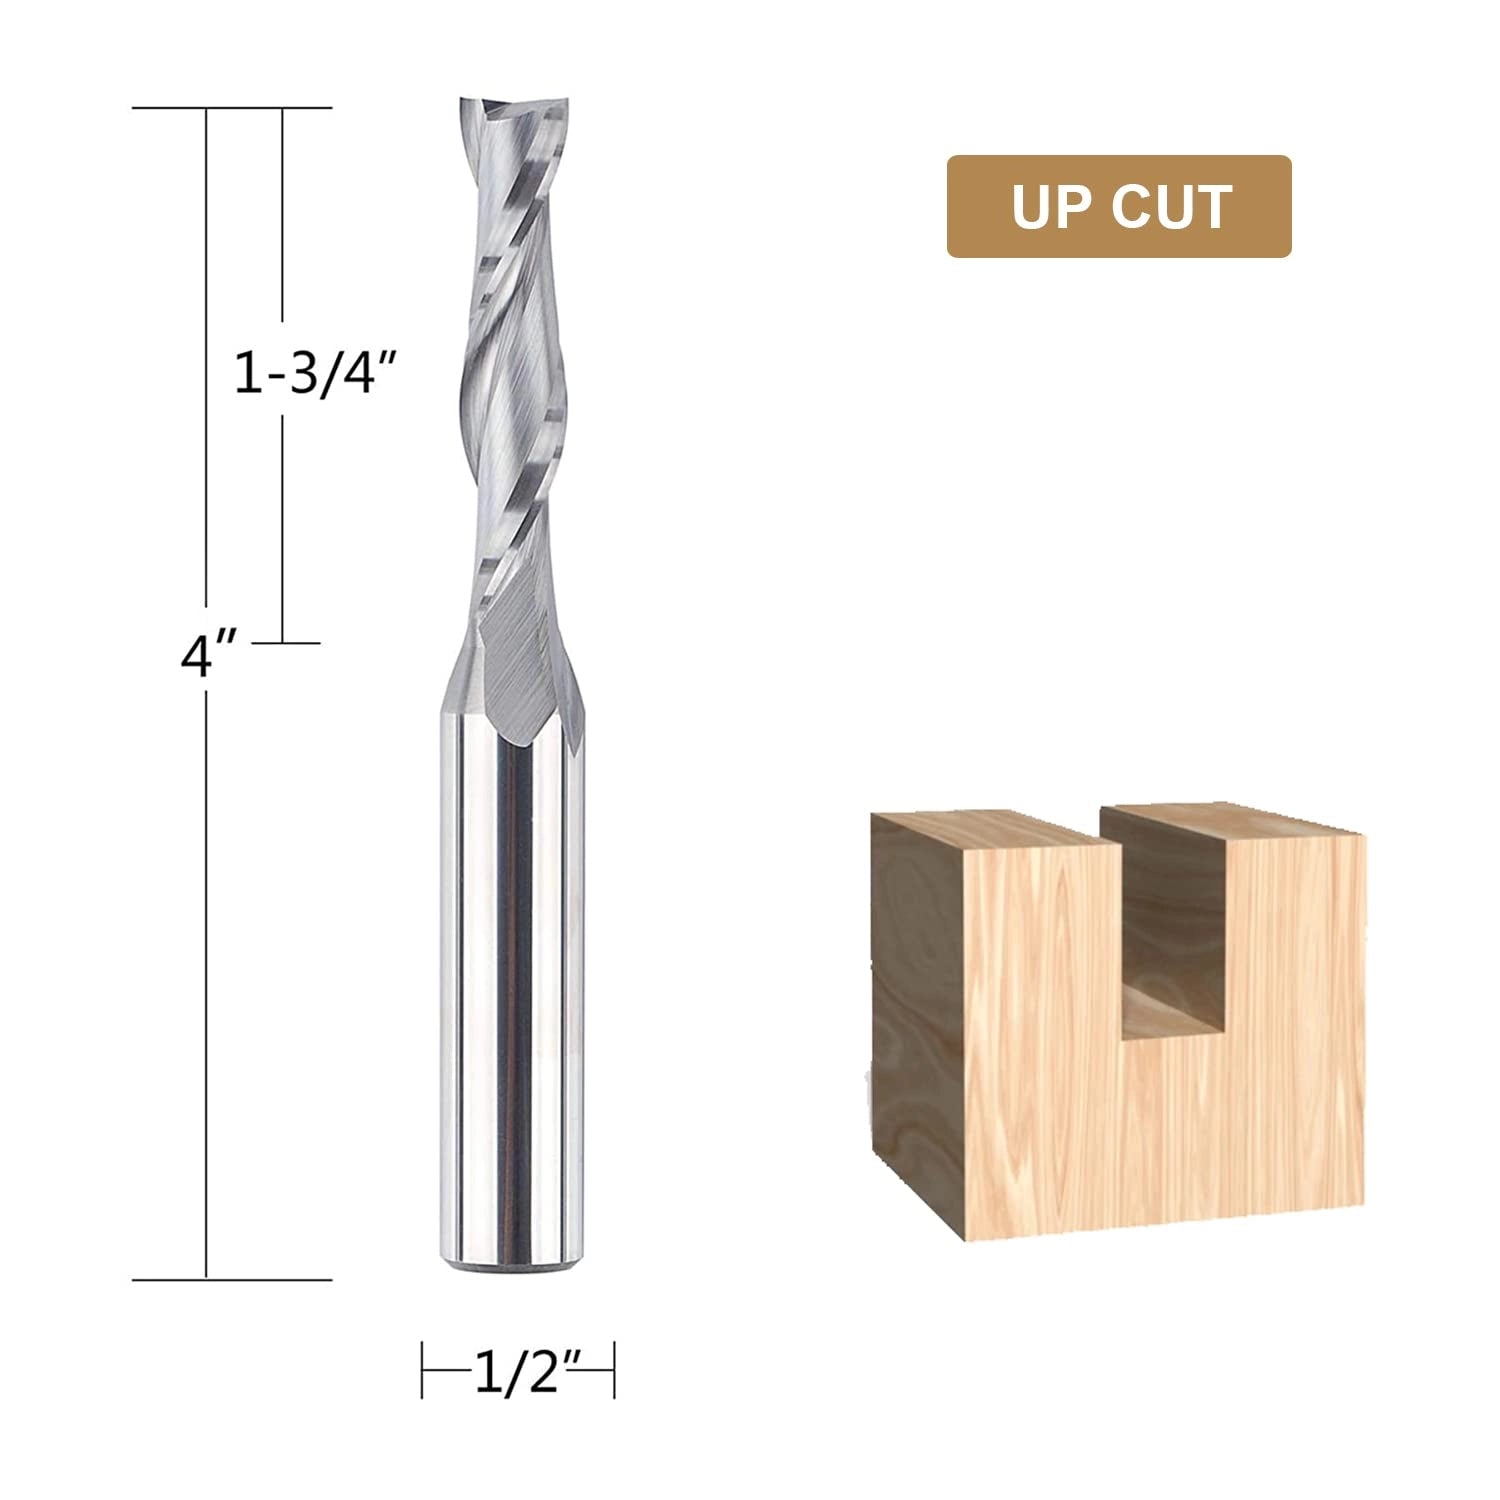 SpeTool Spiral Upcut Router Bit 3/8" Dia 4" Extra Long For Woodworking